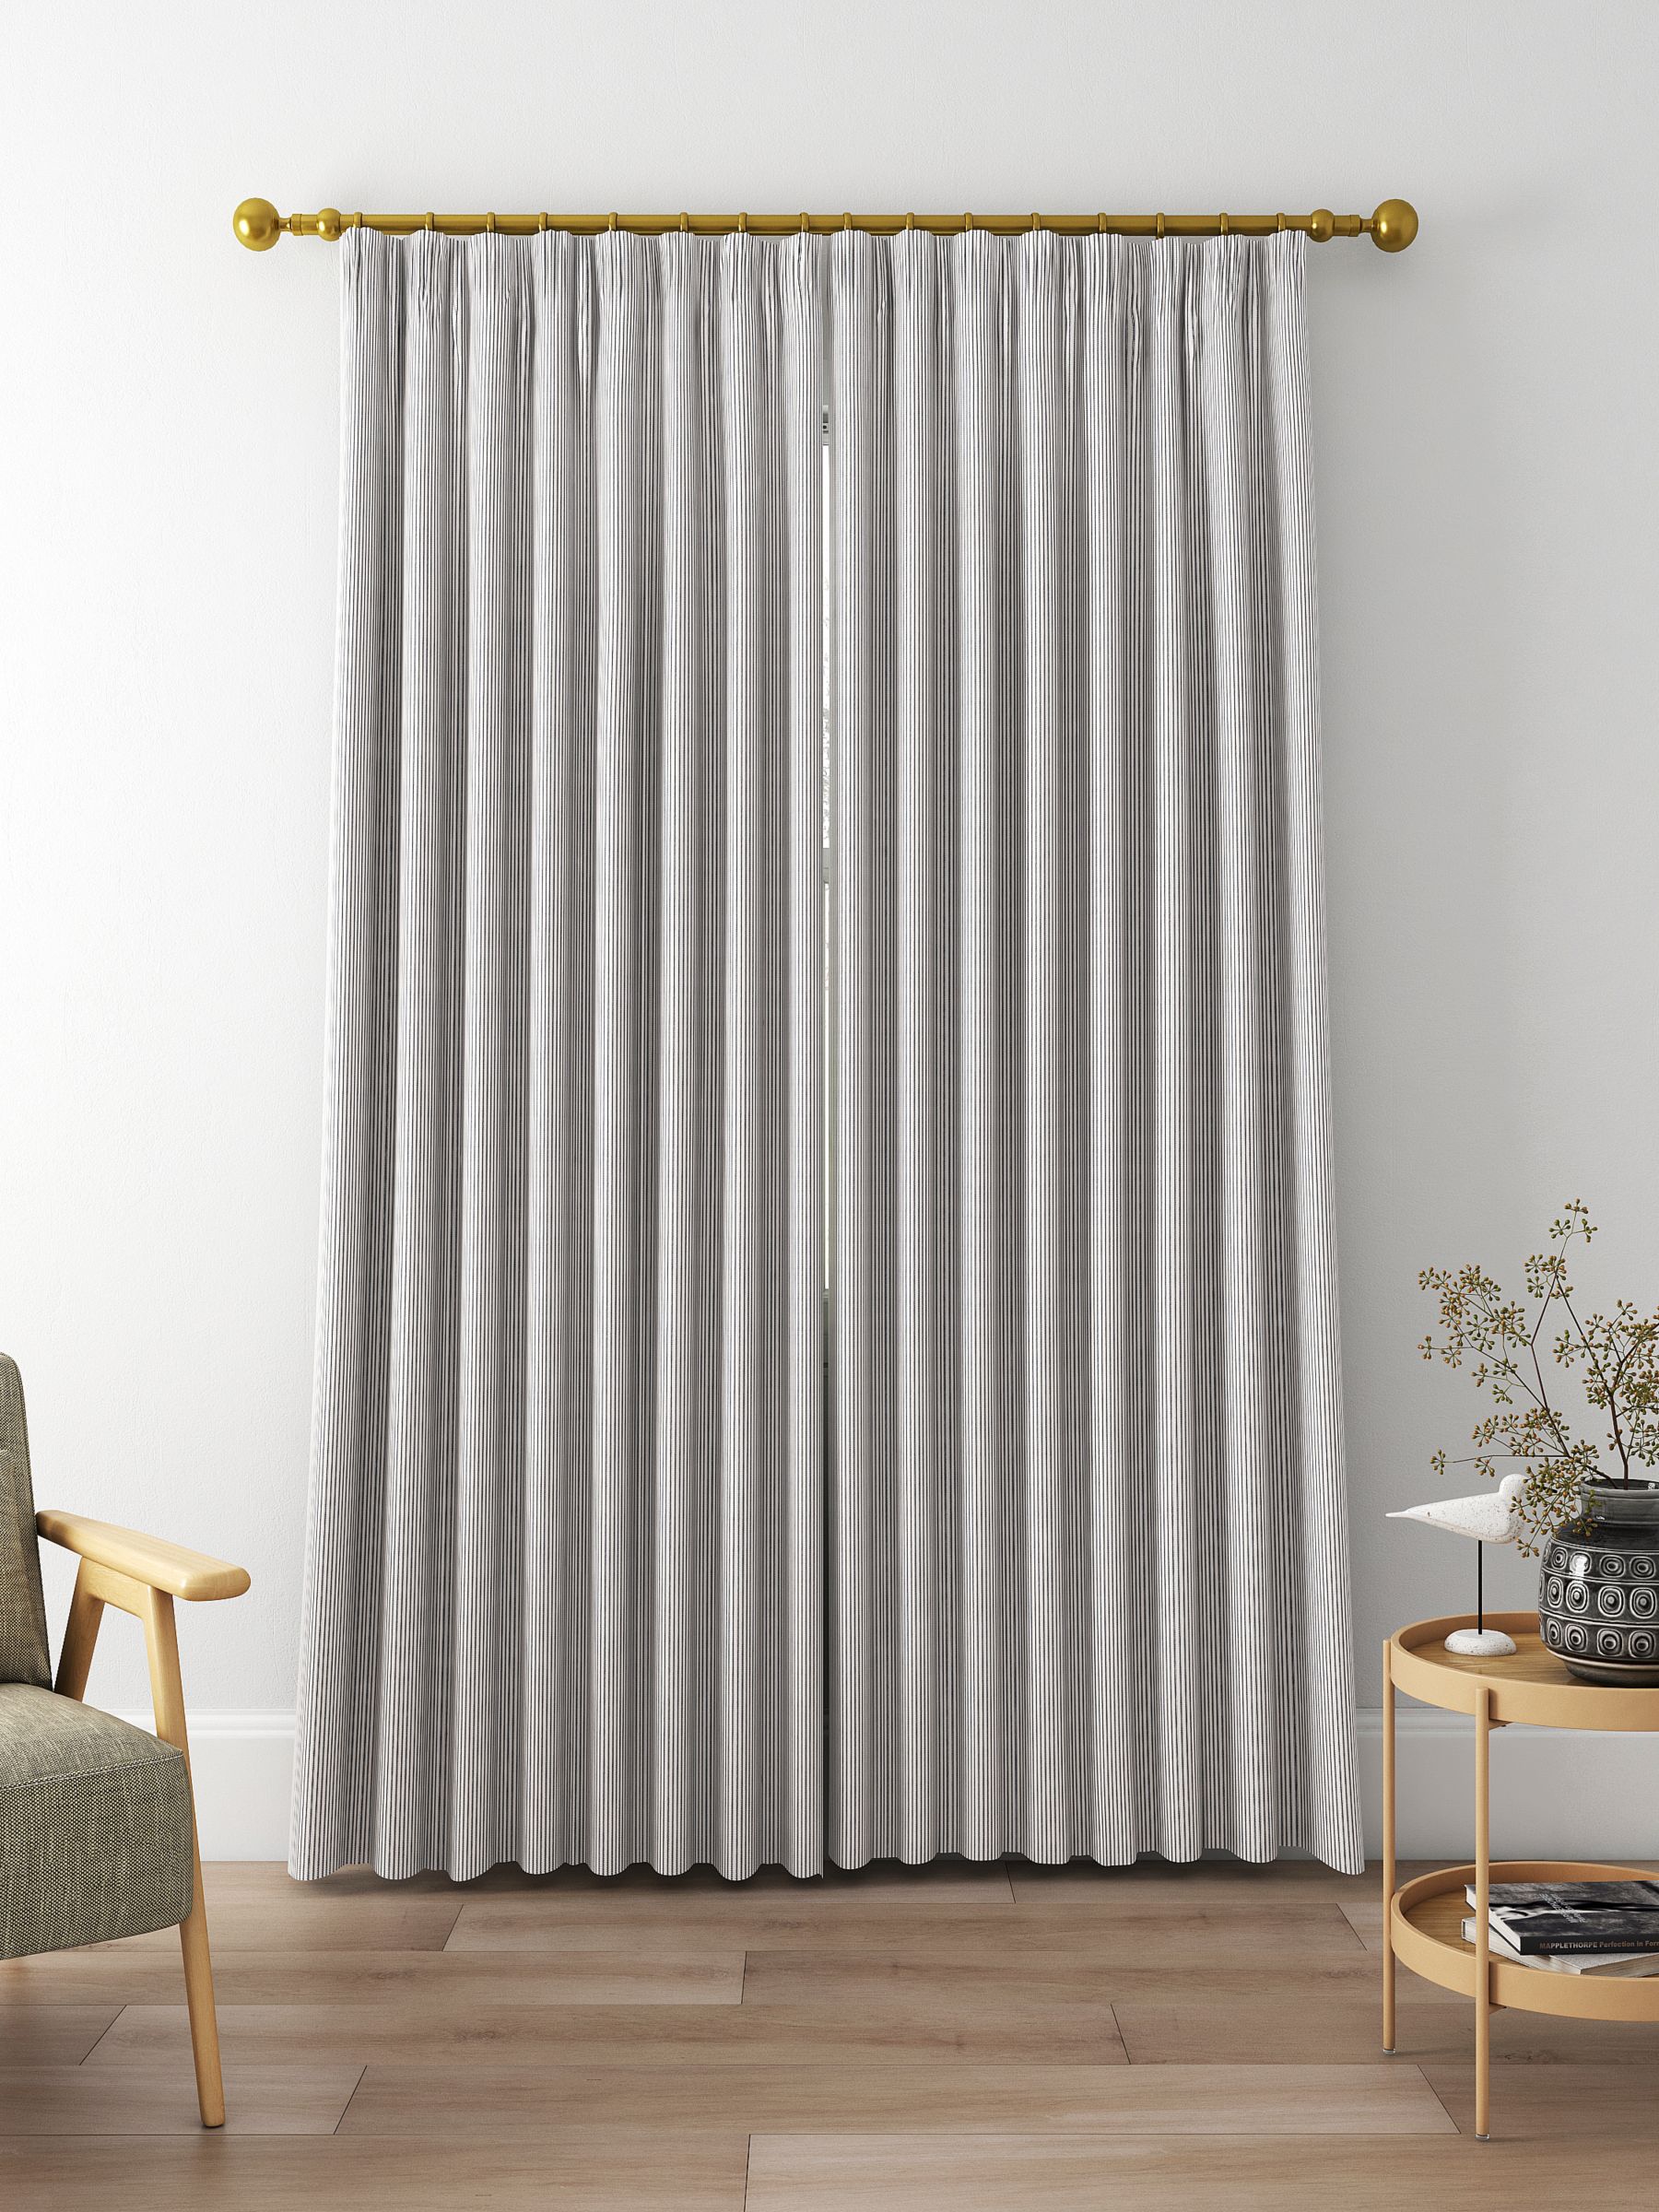 Clarke & Clarke Sutton Made to Measure Curtains, Charcoal